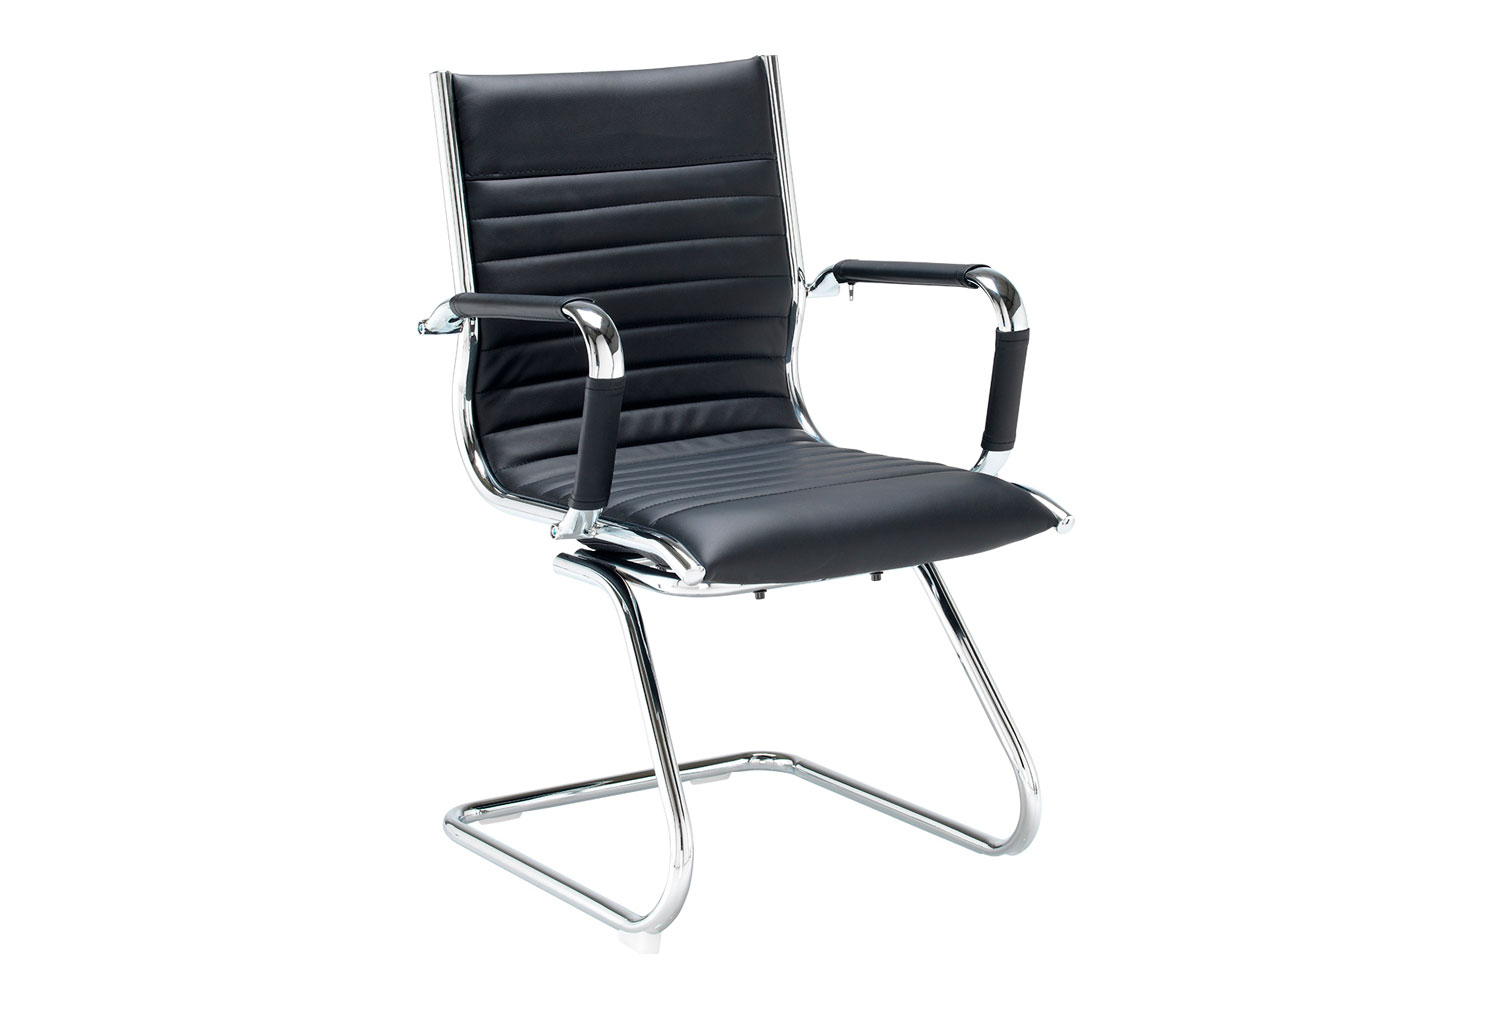 Bari Cantilever Office Chair, Black, Express Delivery